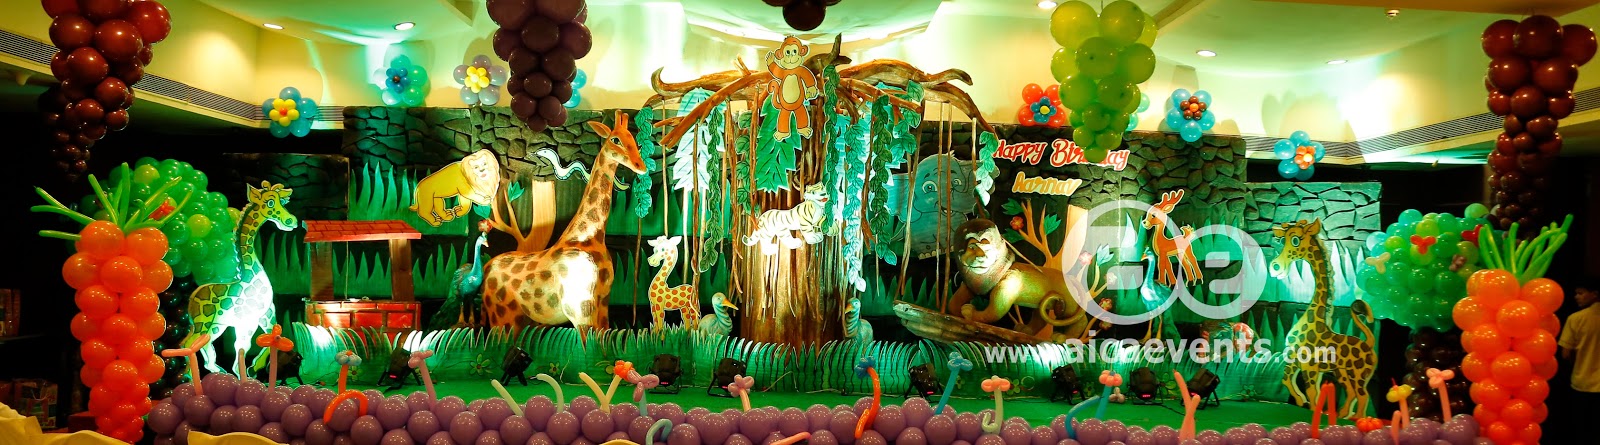 aicaevents Jungle  Theme  Birthday  party  Decorations 